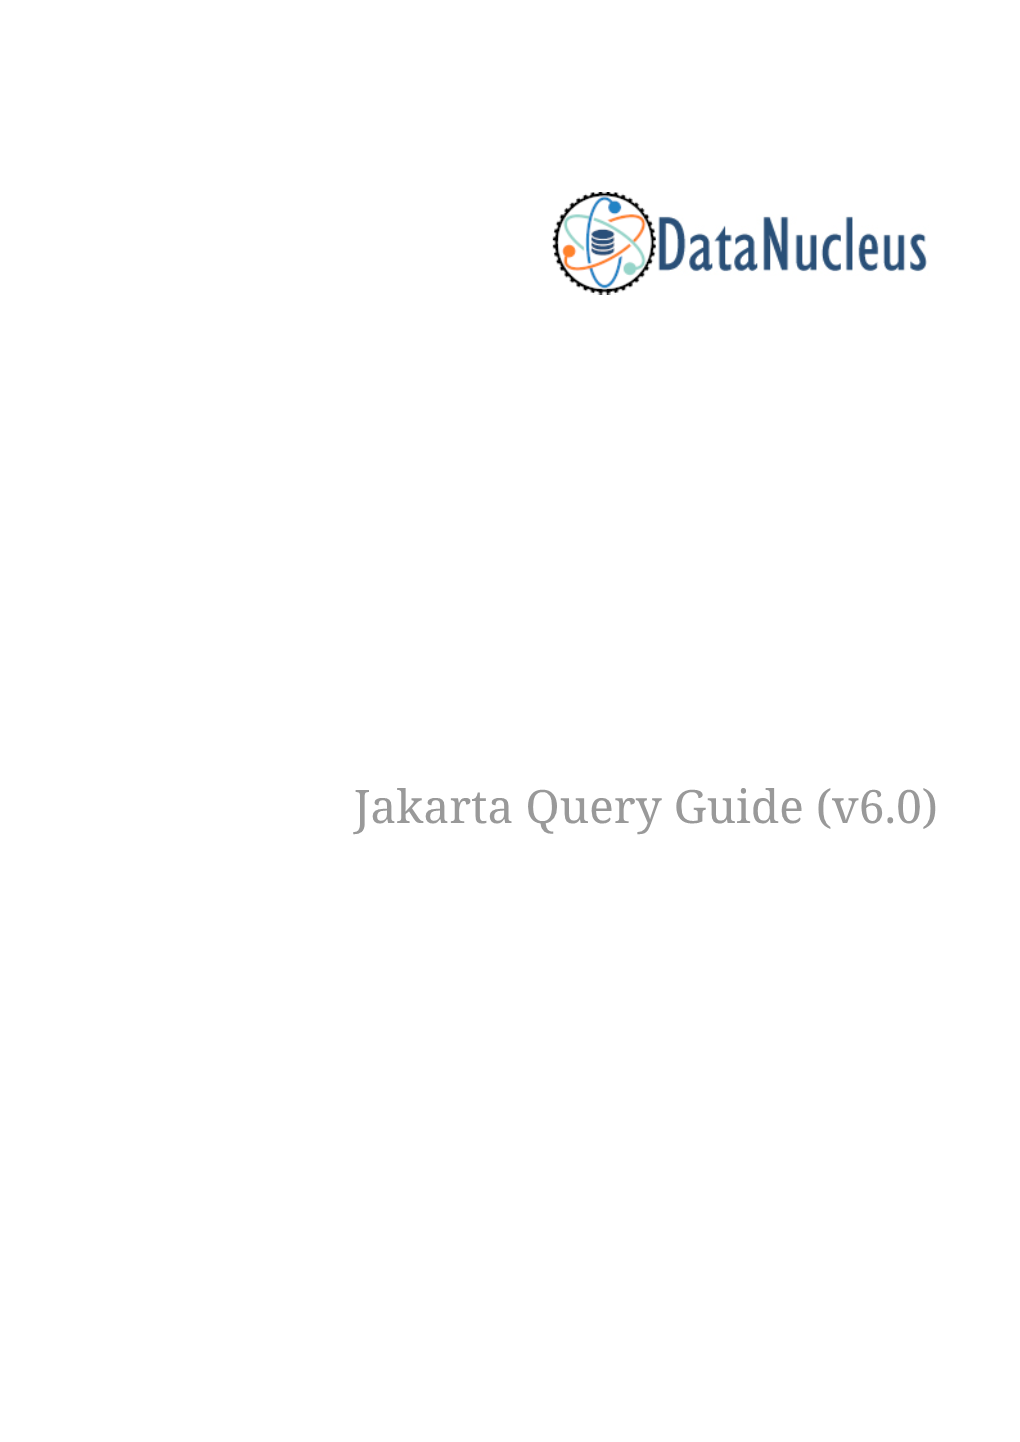 Jakarta Query Guide (V6.0) Table of Contents